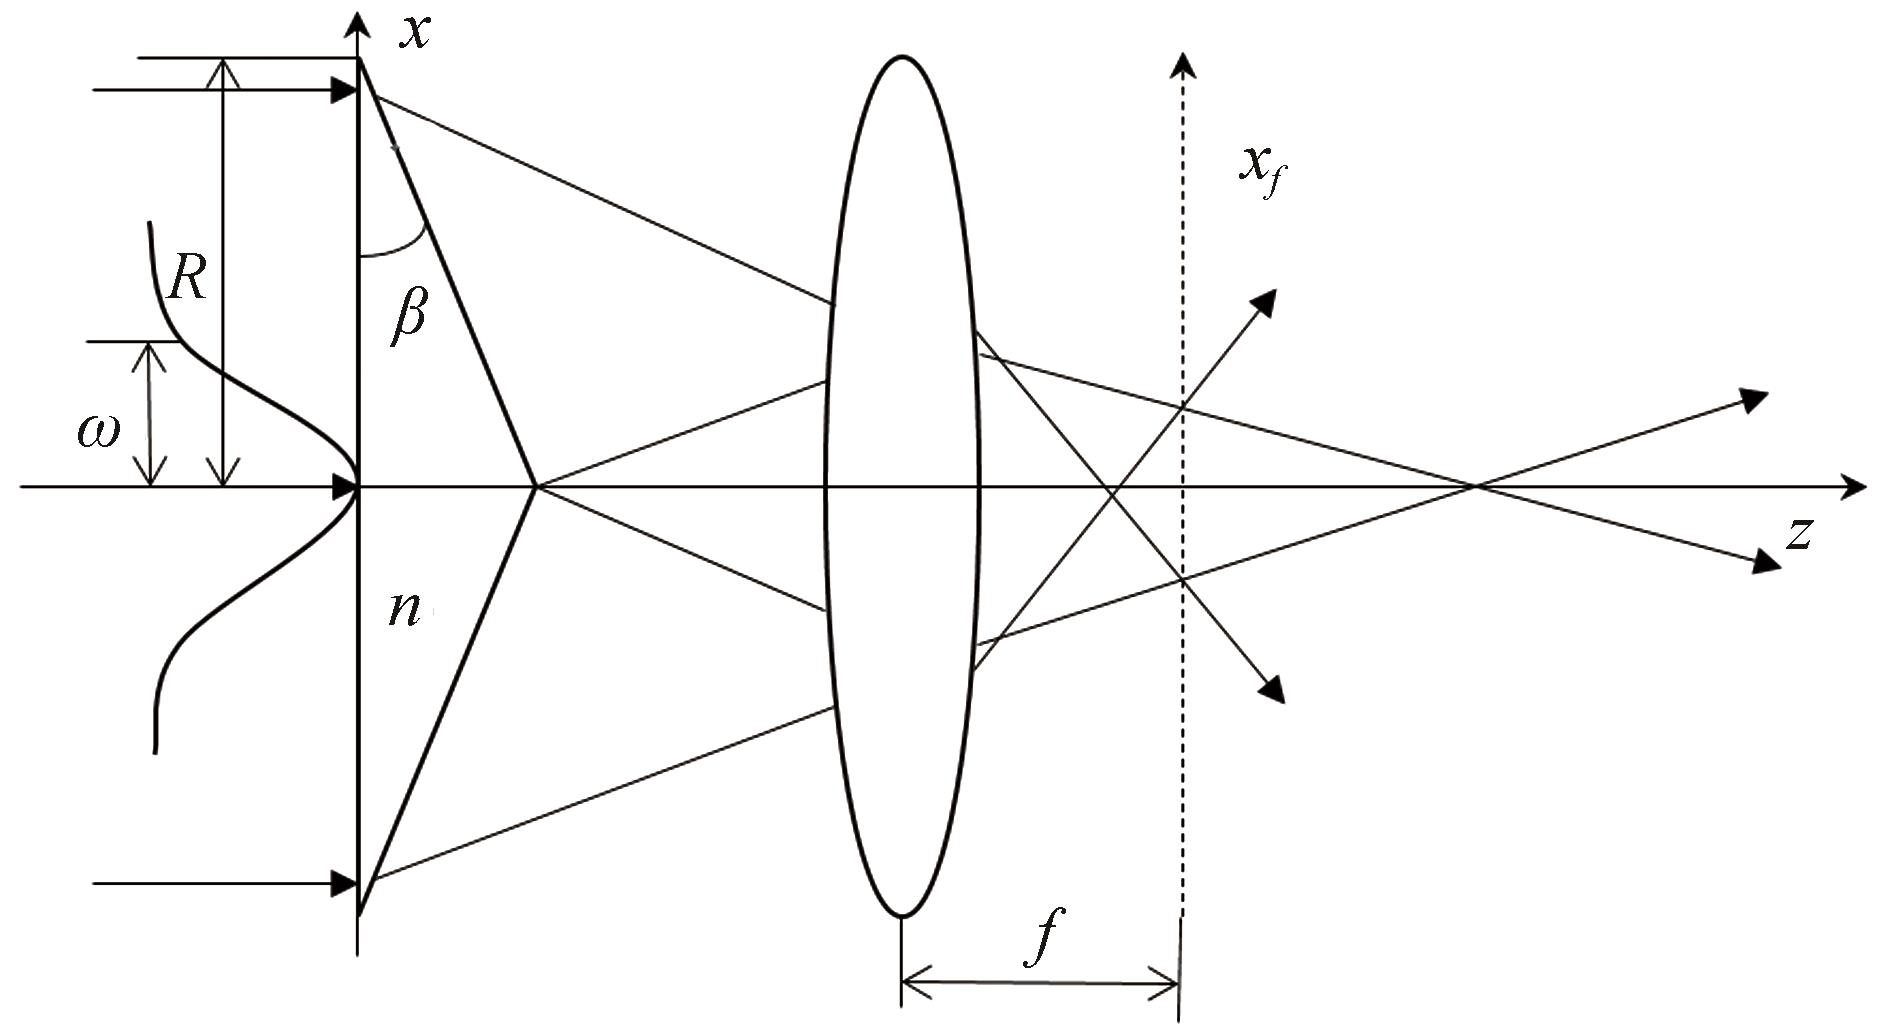 Geometrical schematic in meridional plane for Gaussian beam passing through axicon-lens combination